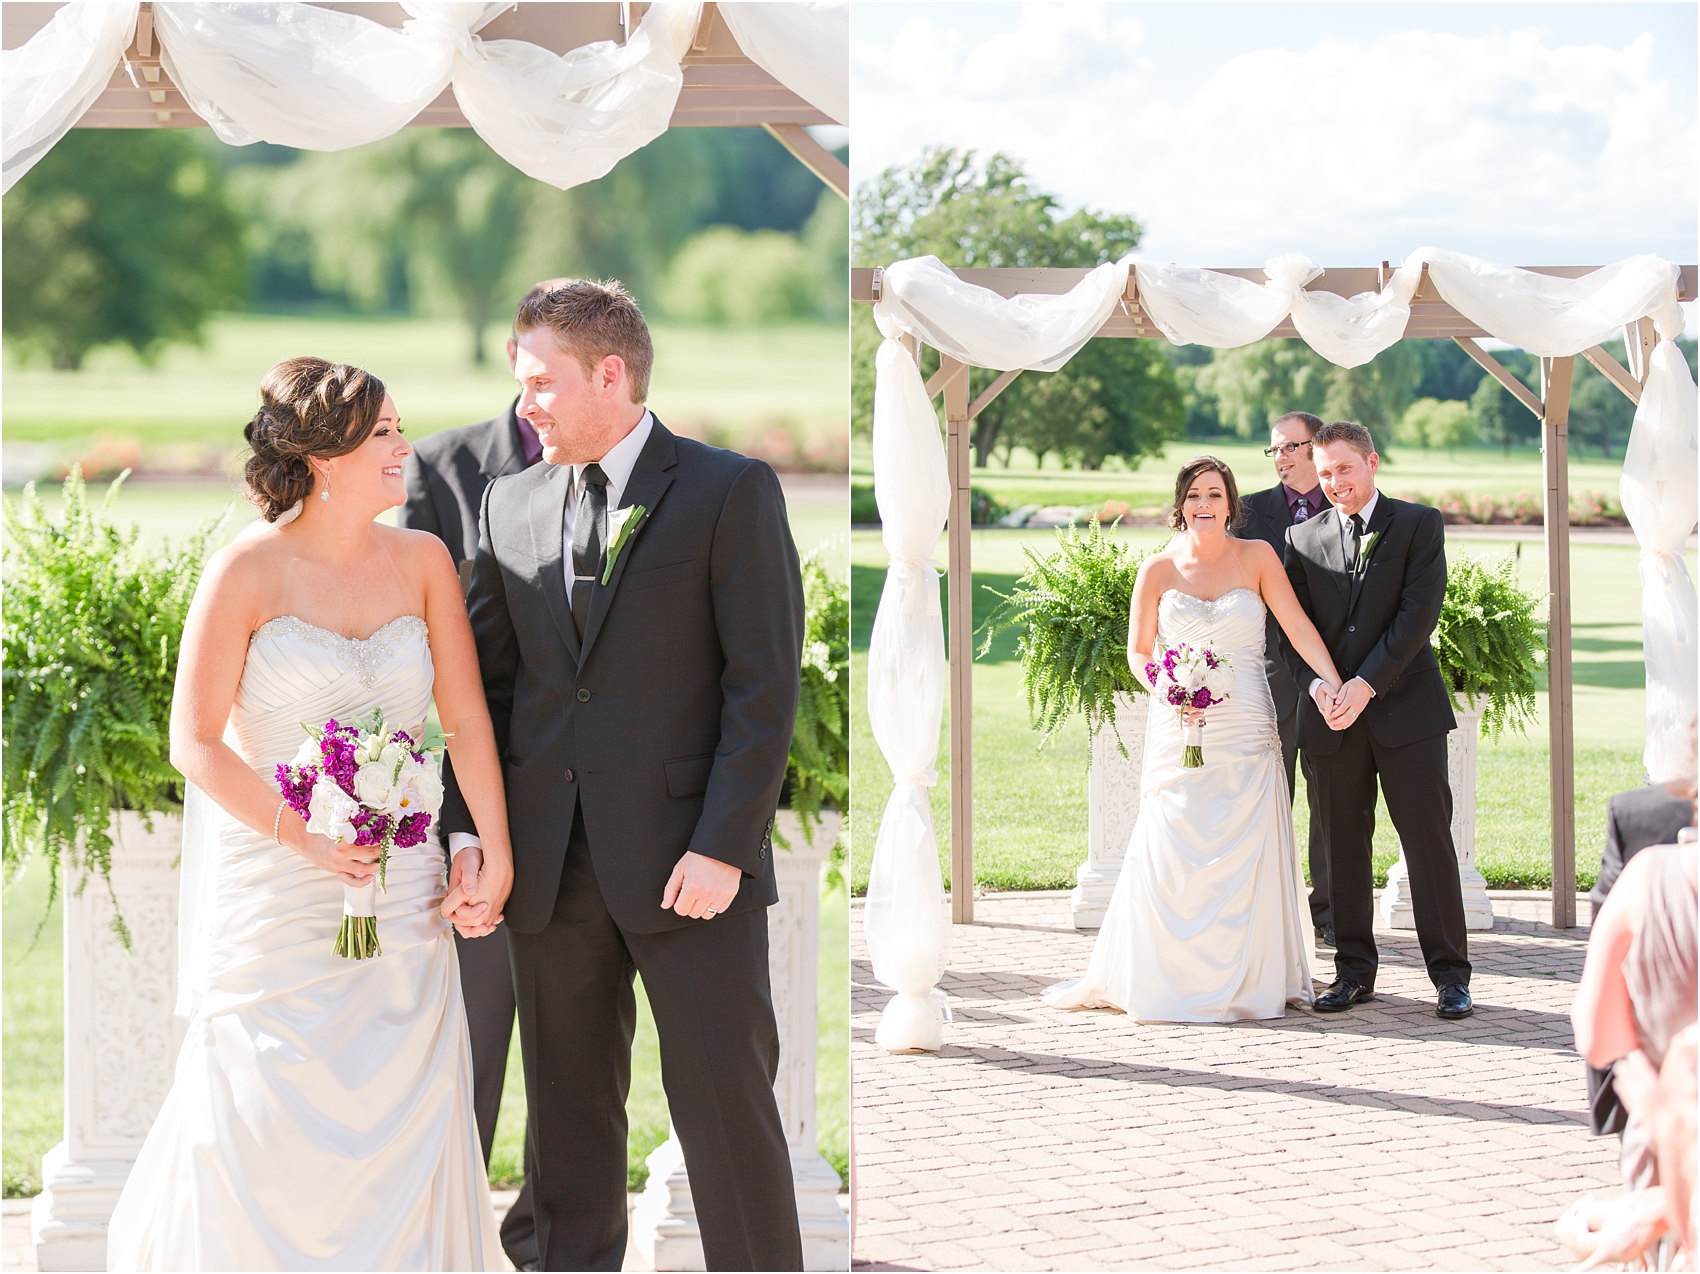 classic-wedding-photos-at-great-oaks-country-club-in-rochester-hills-mi-by-courtney-carolyn-photography_0085.jpg